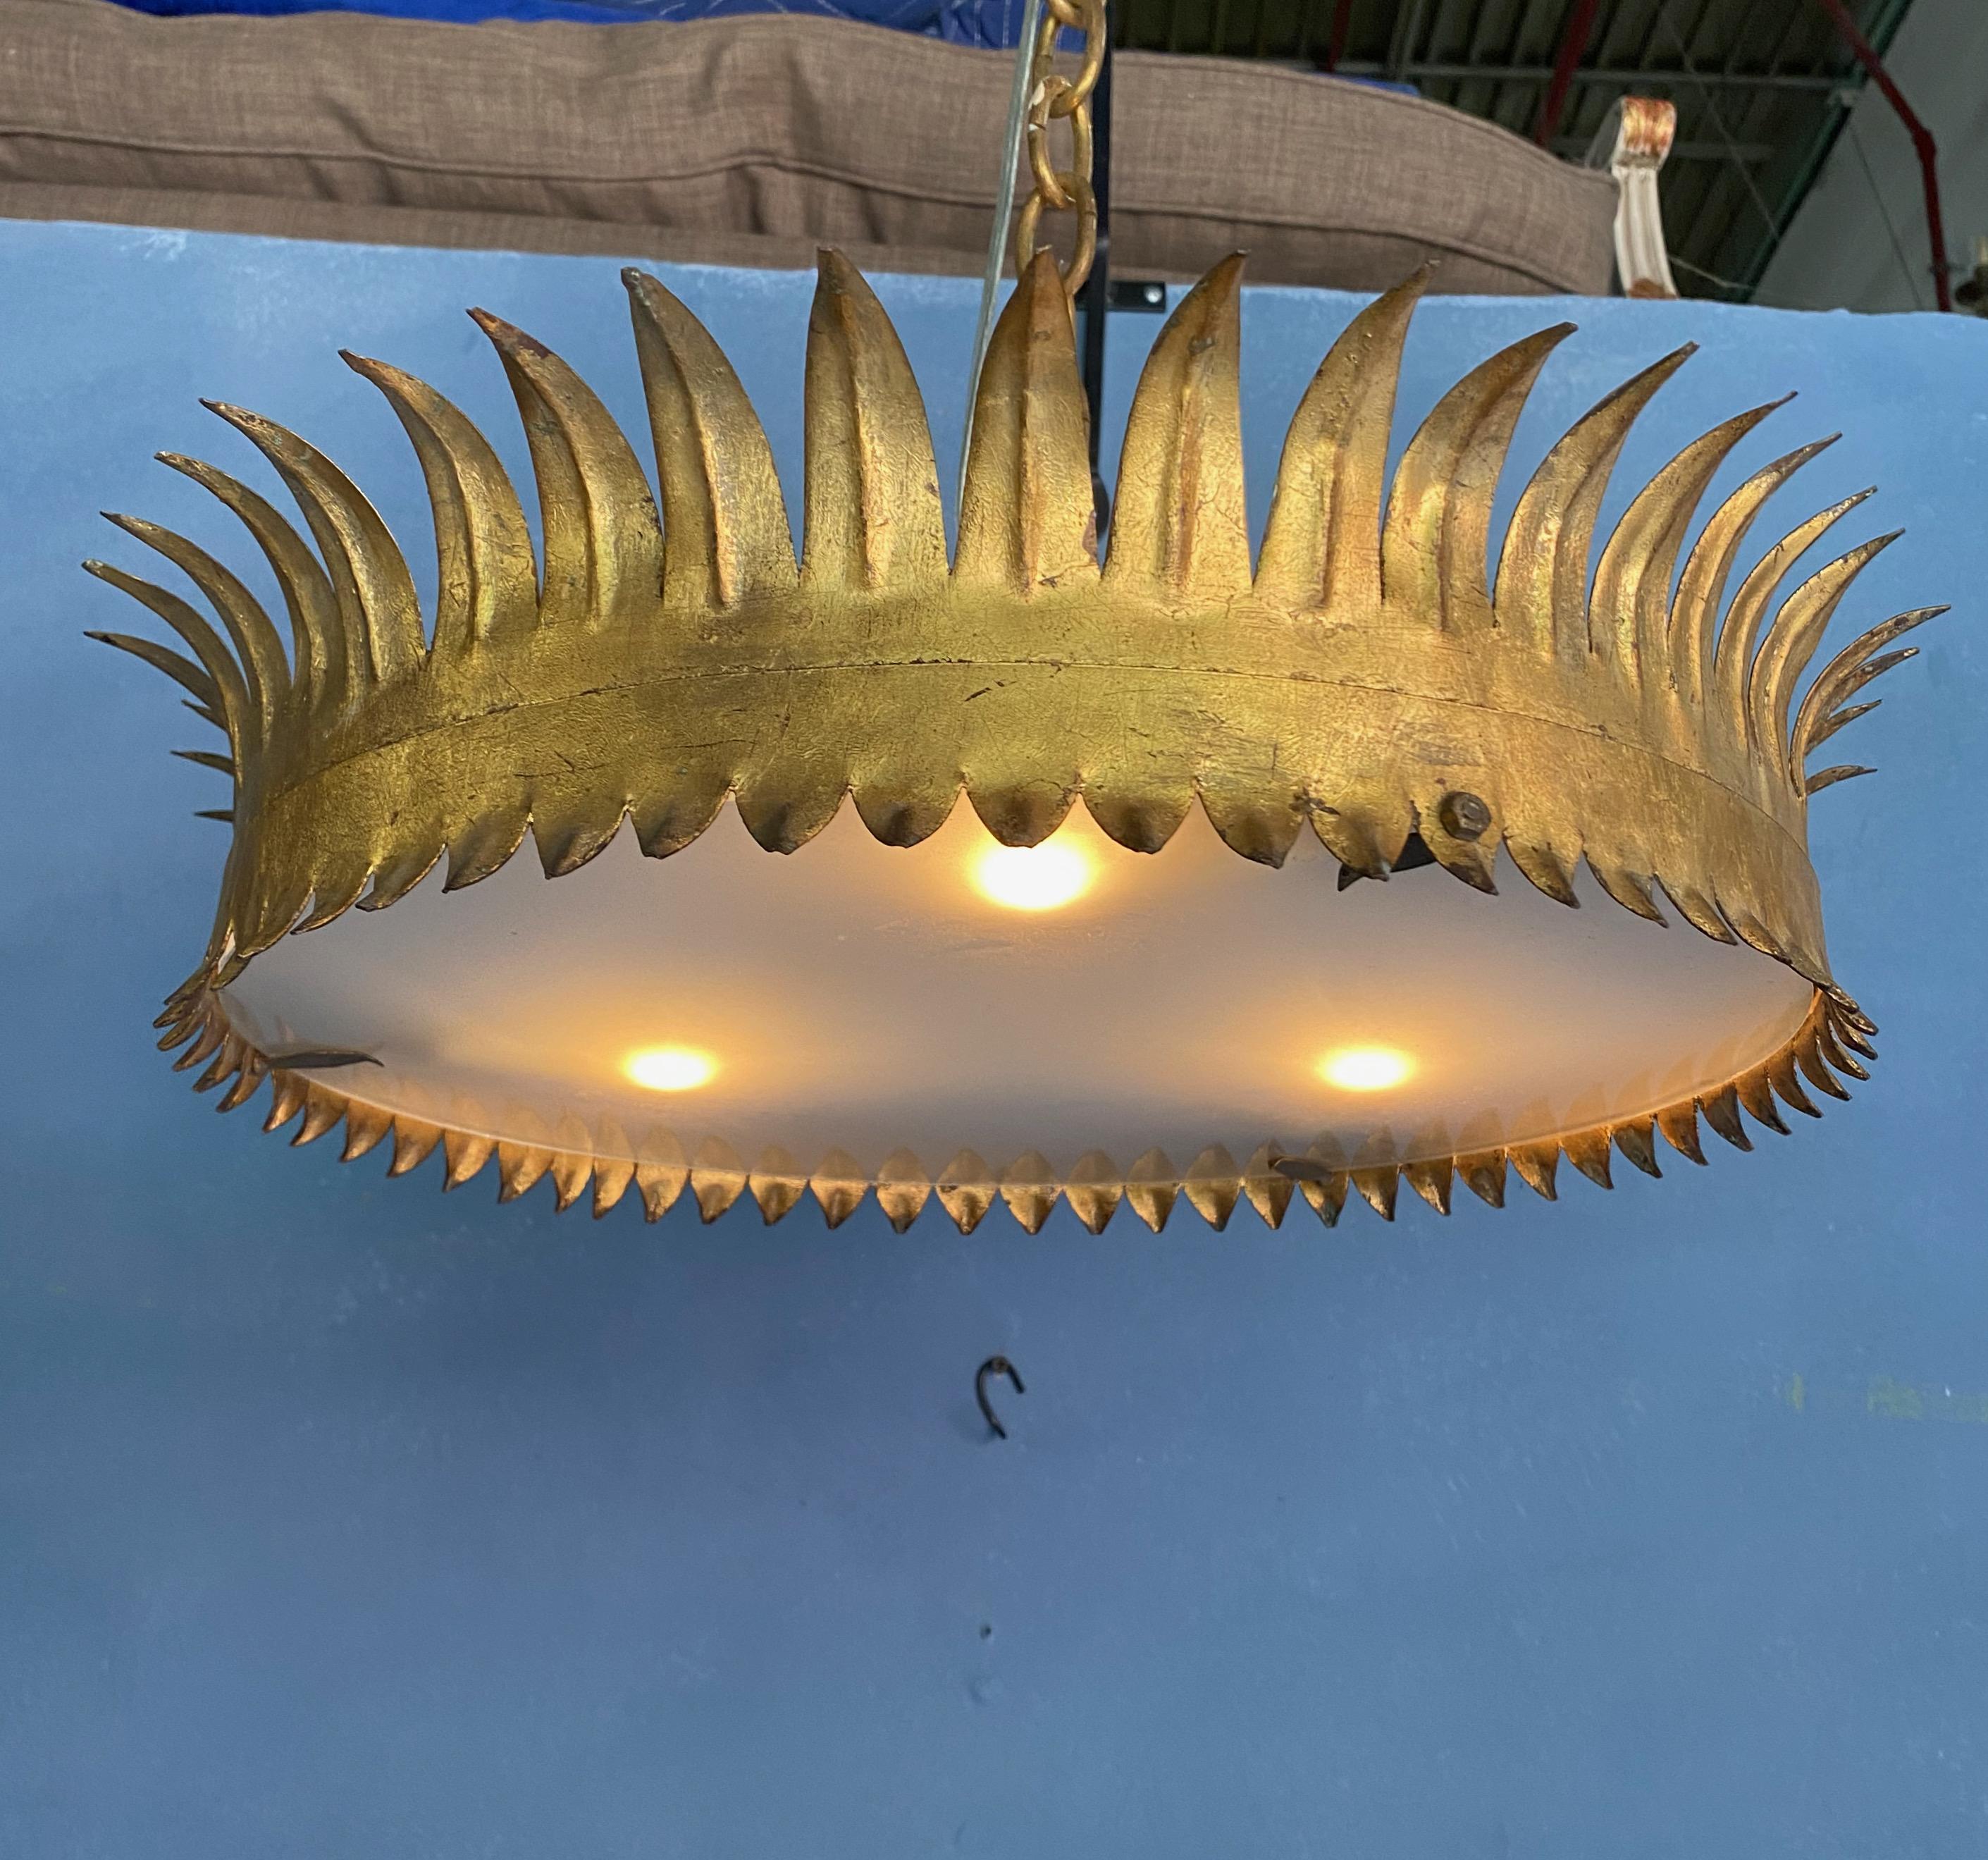 A large scaled crown ceiling fixture composed of pointed rays on the upper part and smaller ones on the lower part. The metal has a rich hand gilt  finish. The acid etched glass diffuser is held in place by 3 clips that makes change the light bulbs